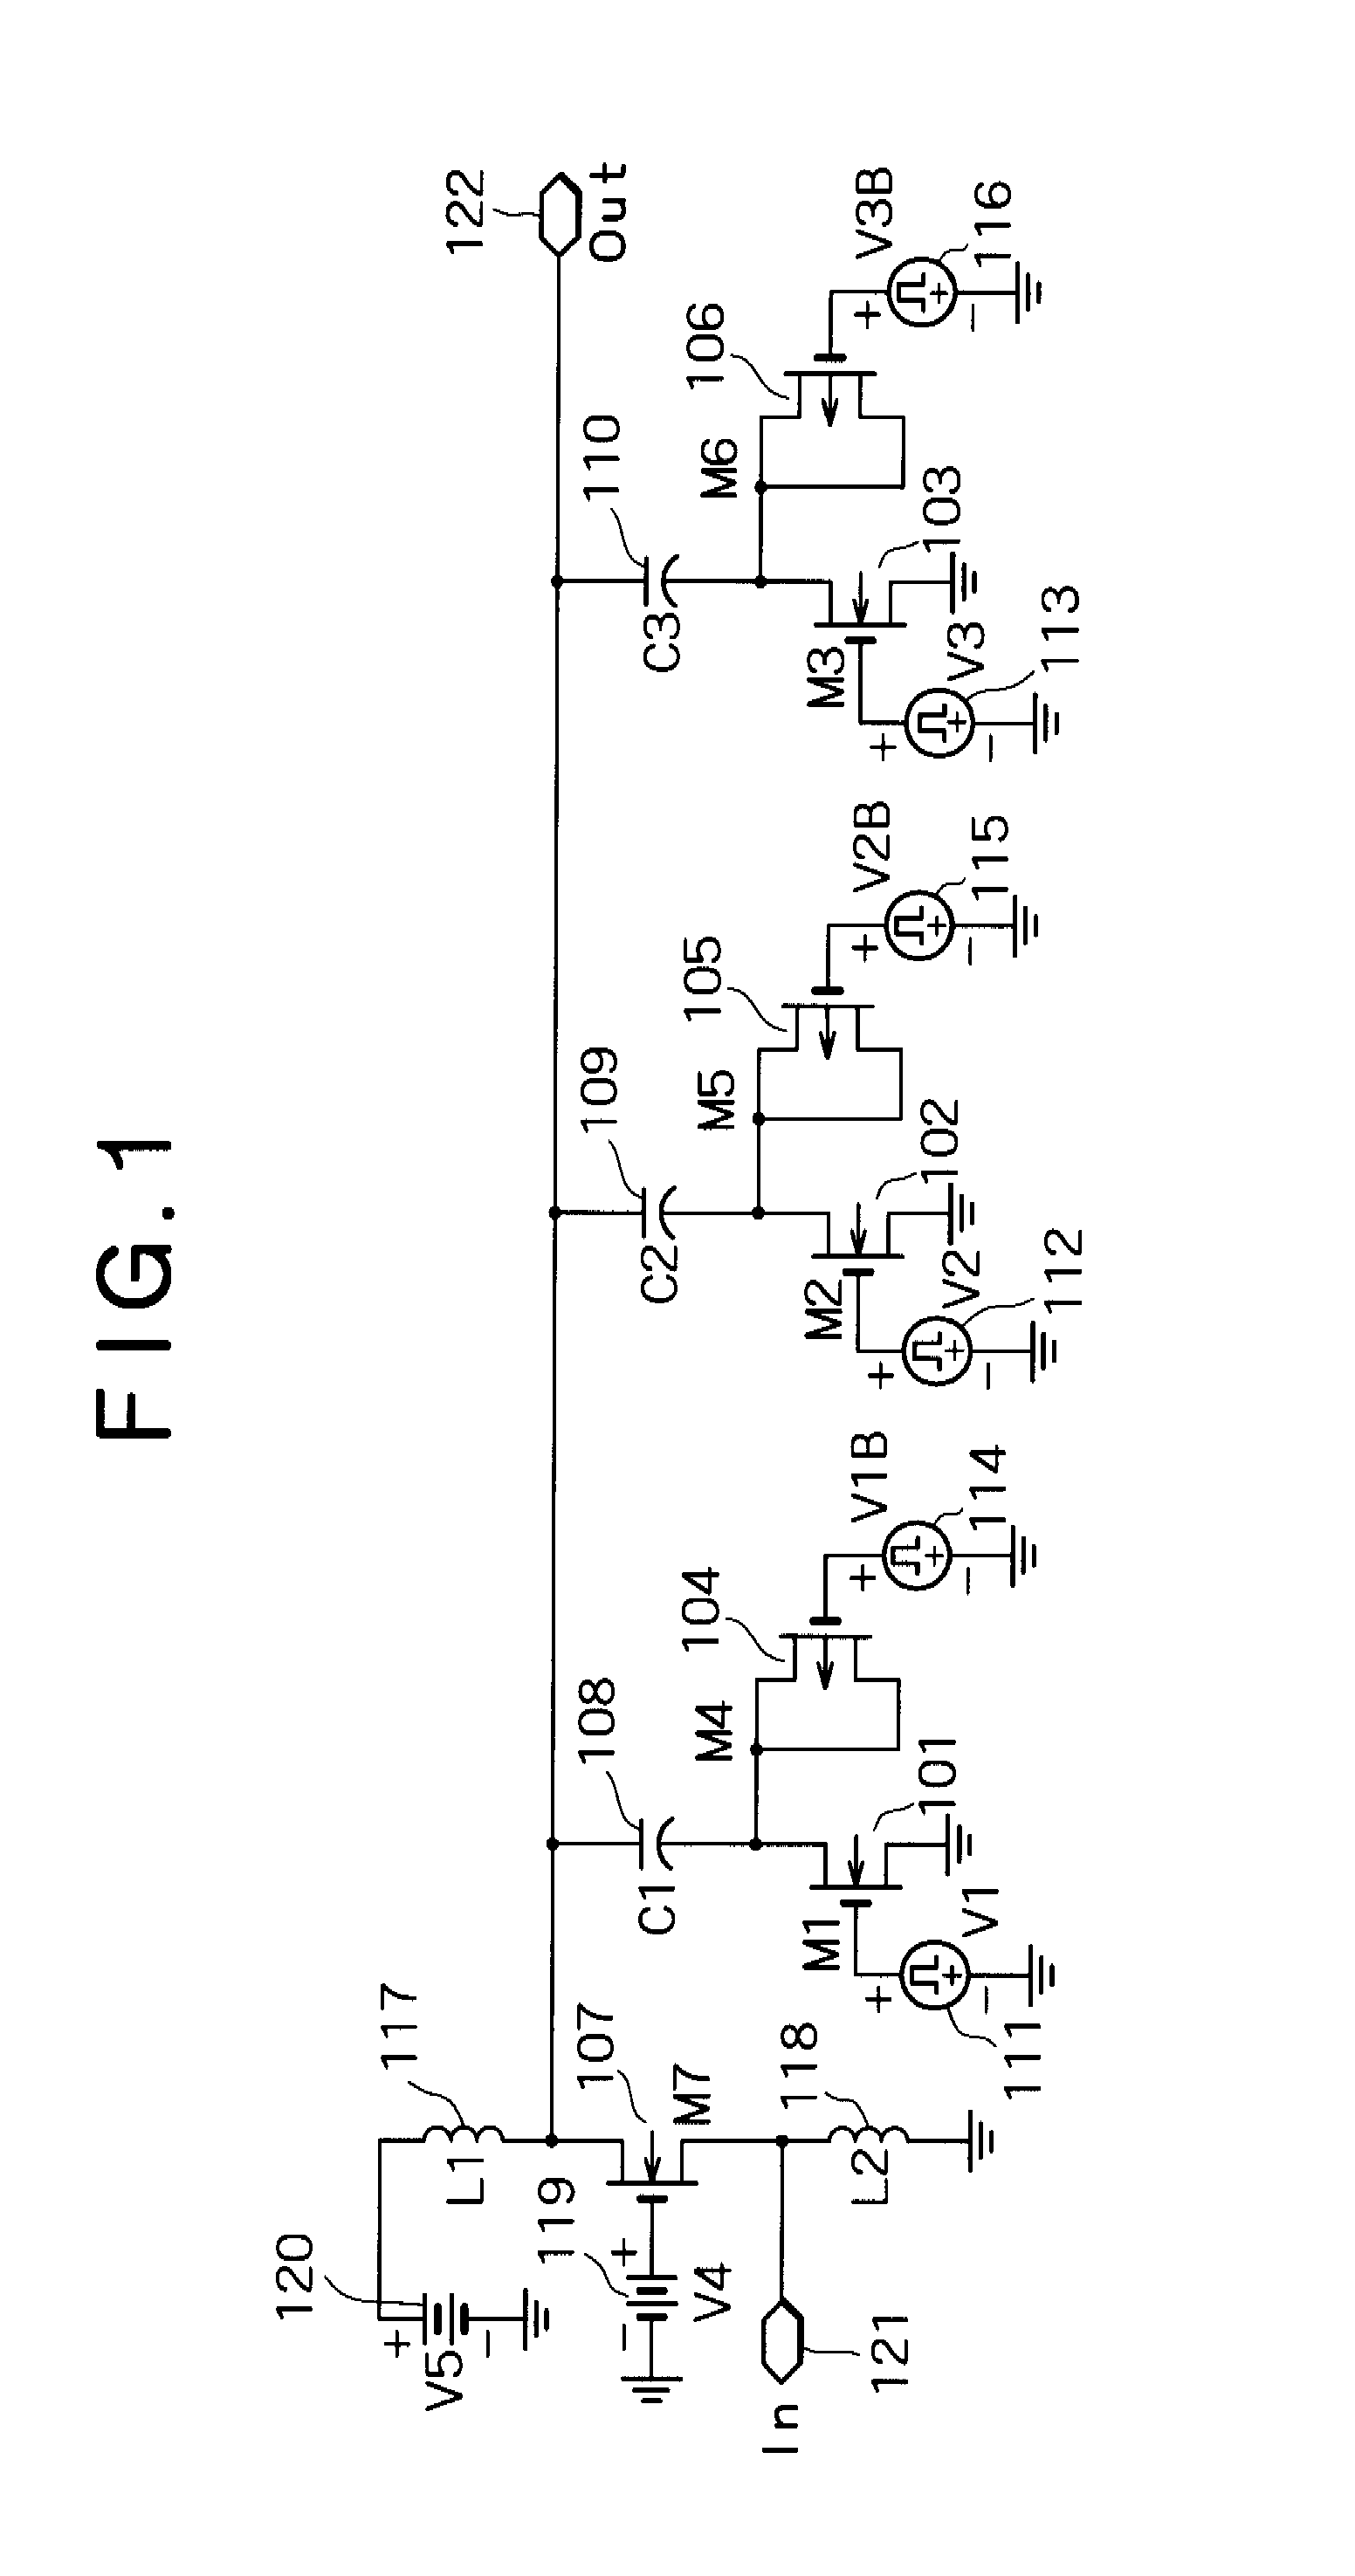 High-frequency amplification circuit